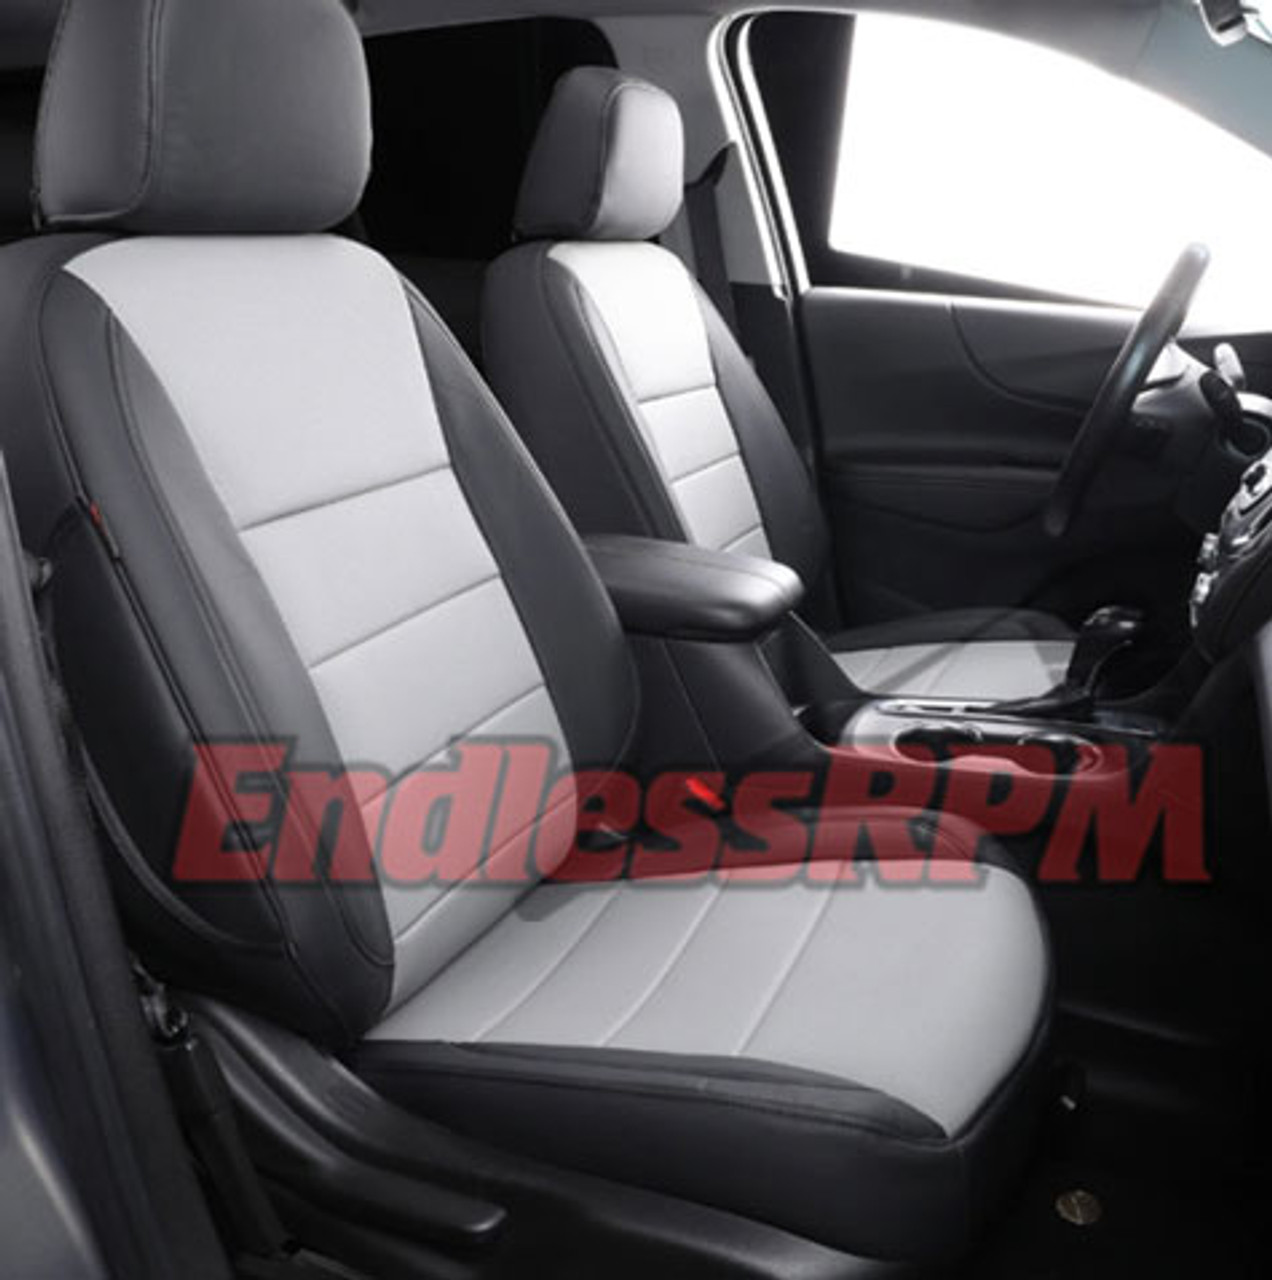 ERPM Seat Covers - All Acura - OEM Style Nappa Leather